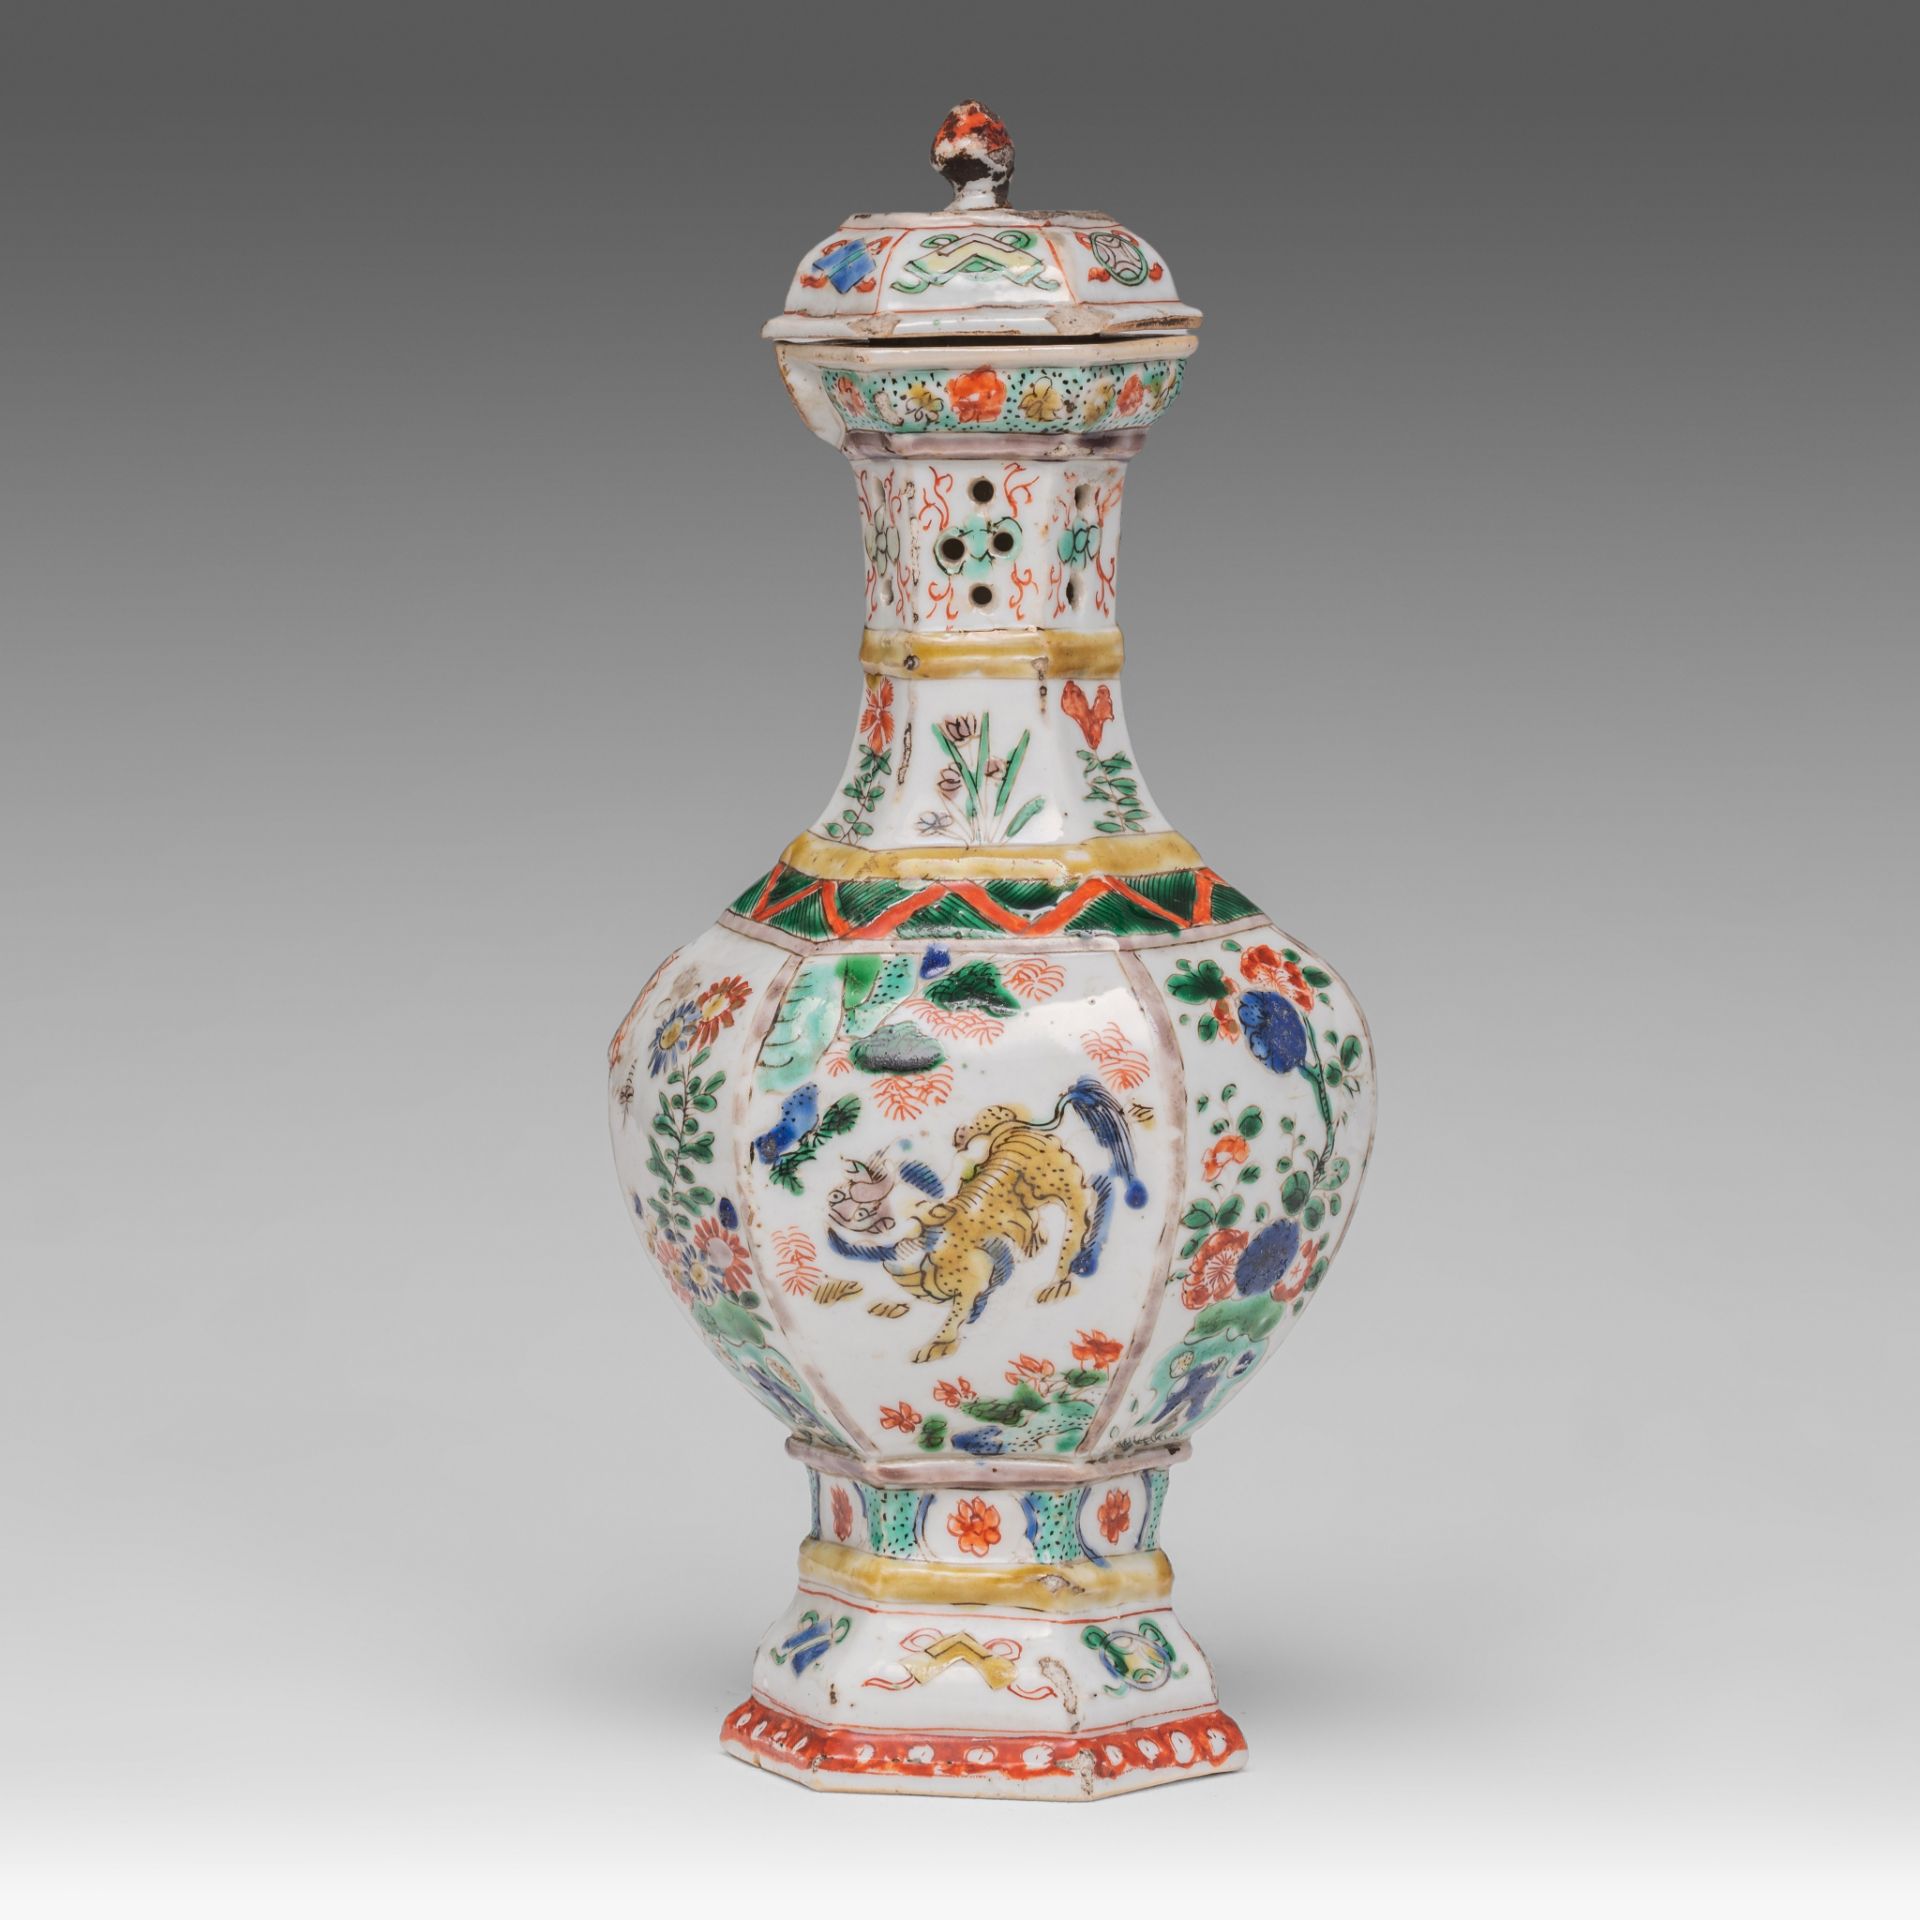 A Chinese famille verte hexagonal puzzle jug or ewer, Kangxi period, H 23,5 cm - Image 4 of 7